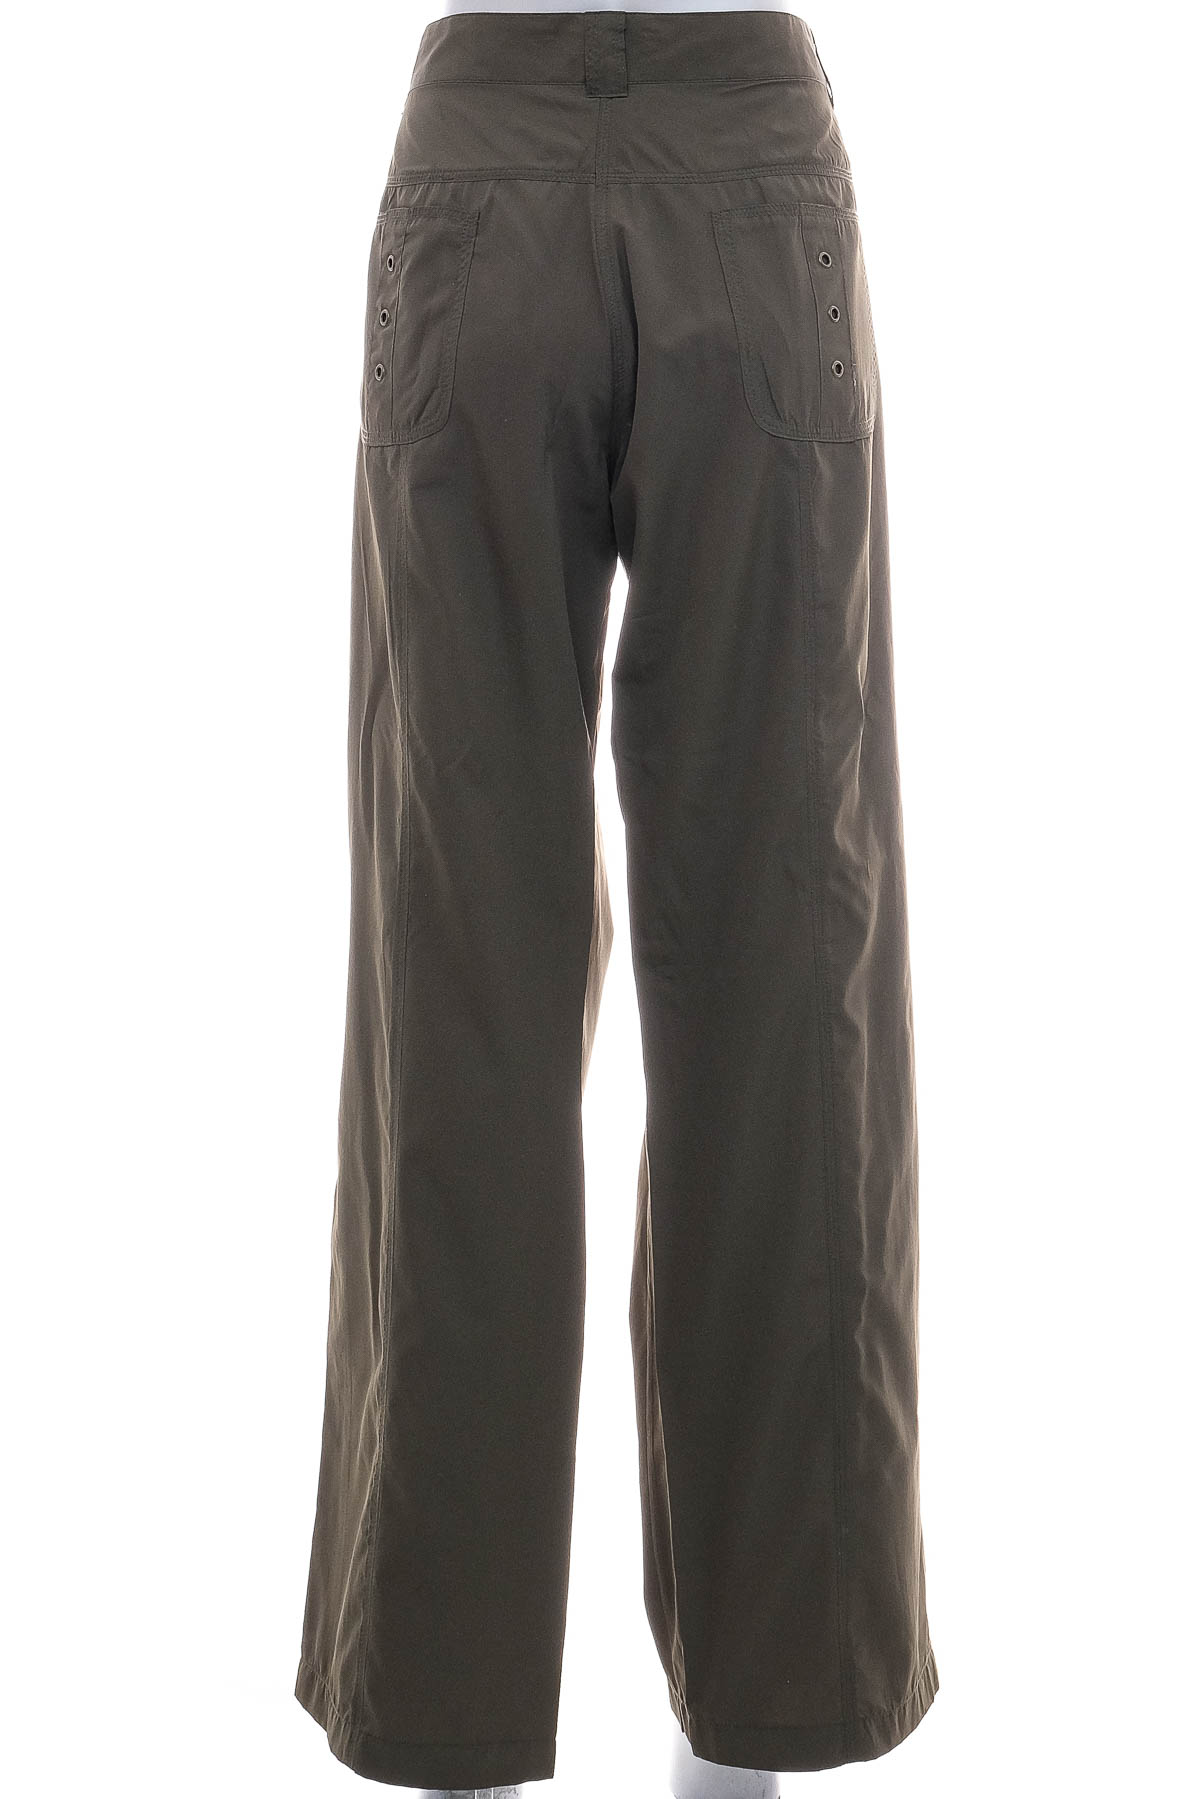 Women's trousers - Quick step - 1